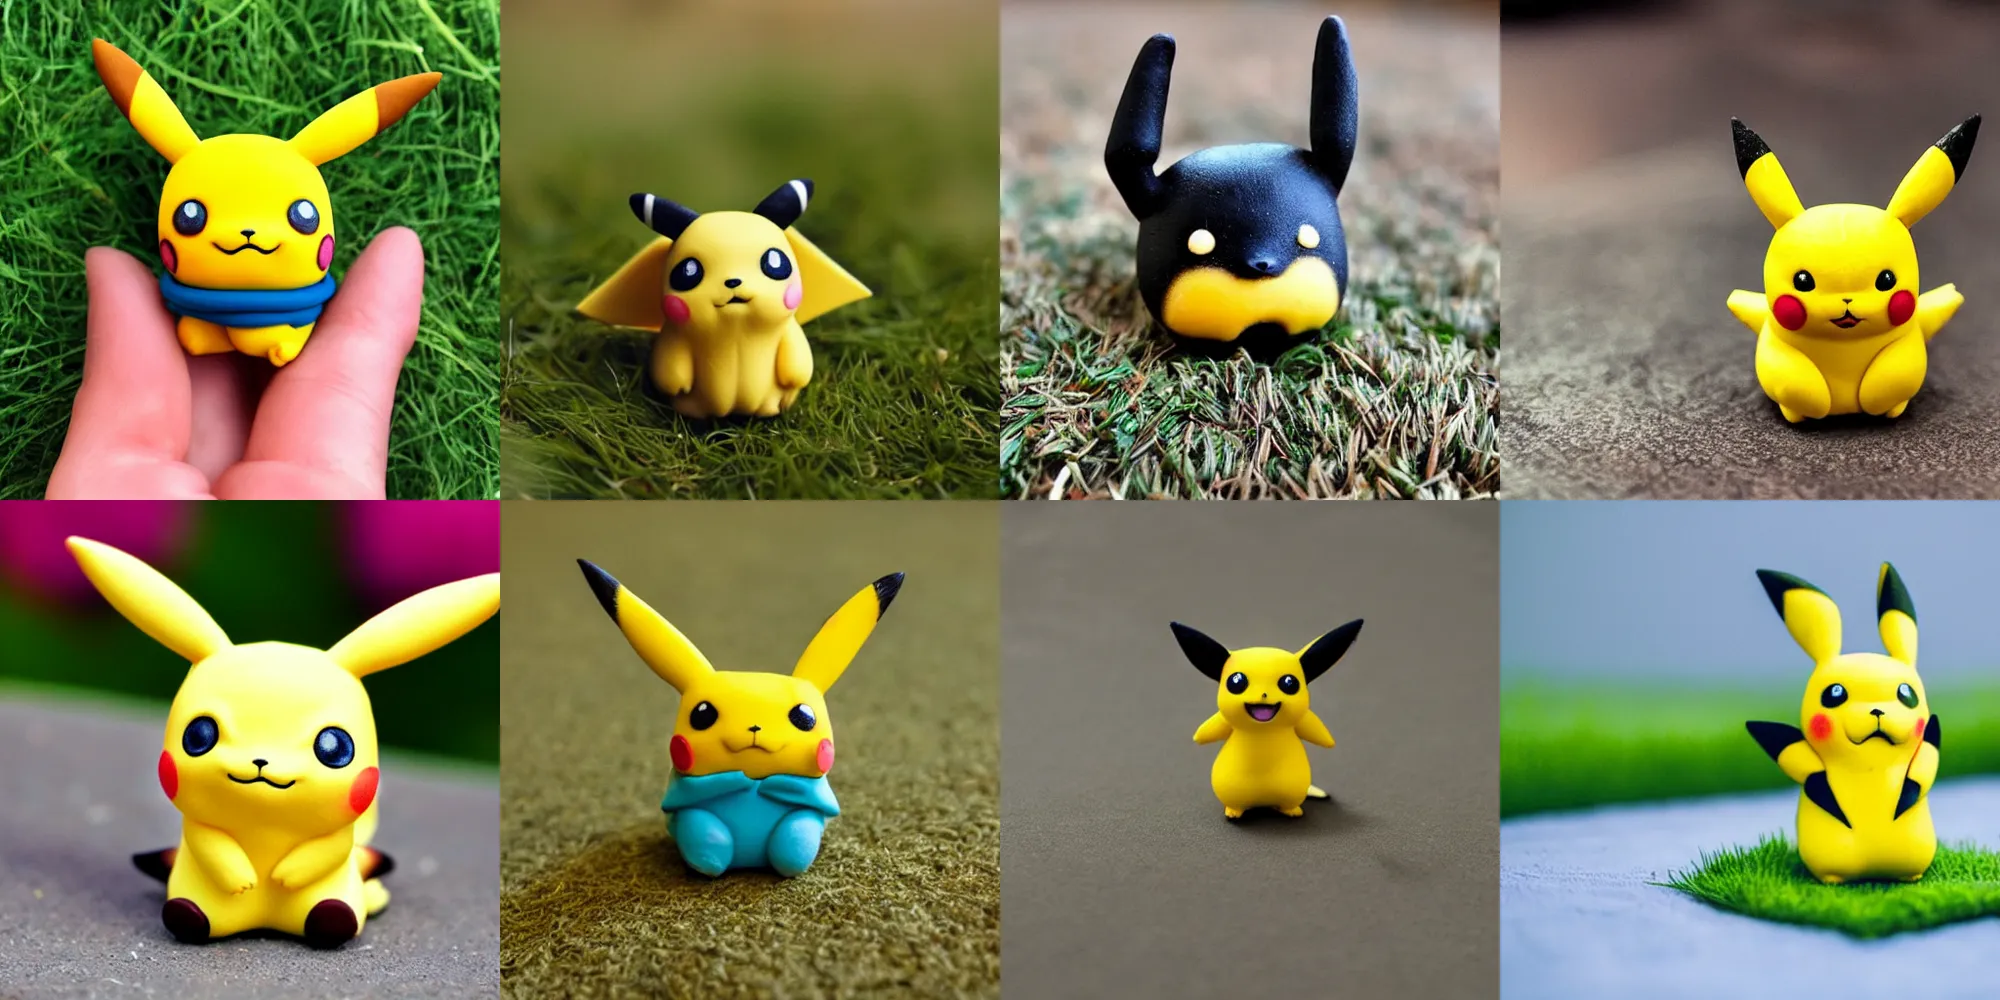 Prompt: the cutest little pikachu figurine made of polymer clay, photographed in real grass